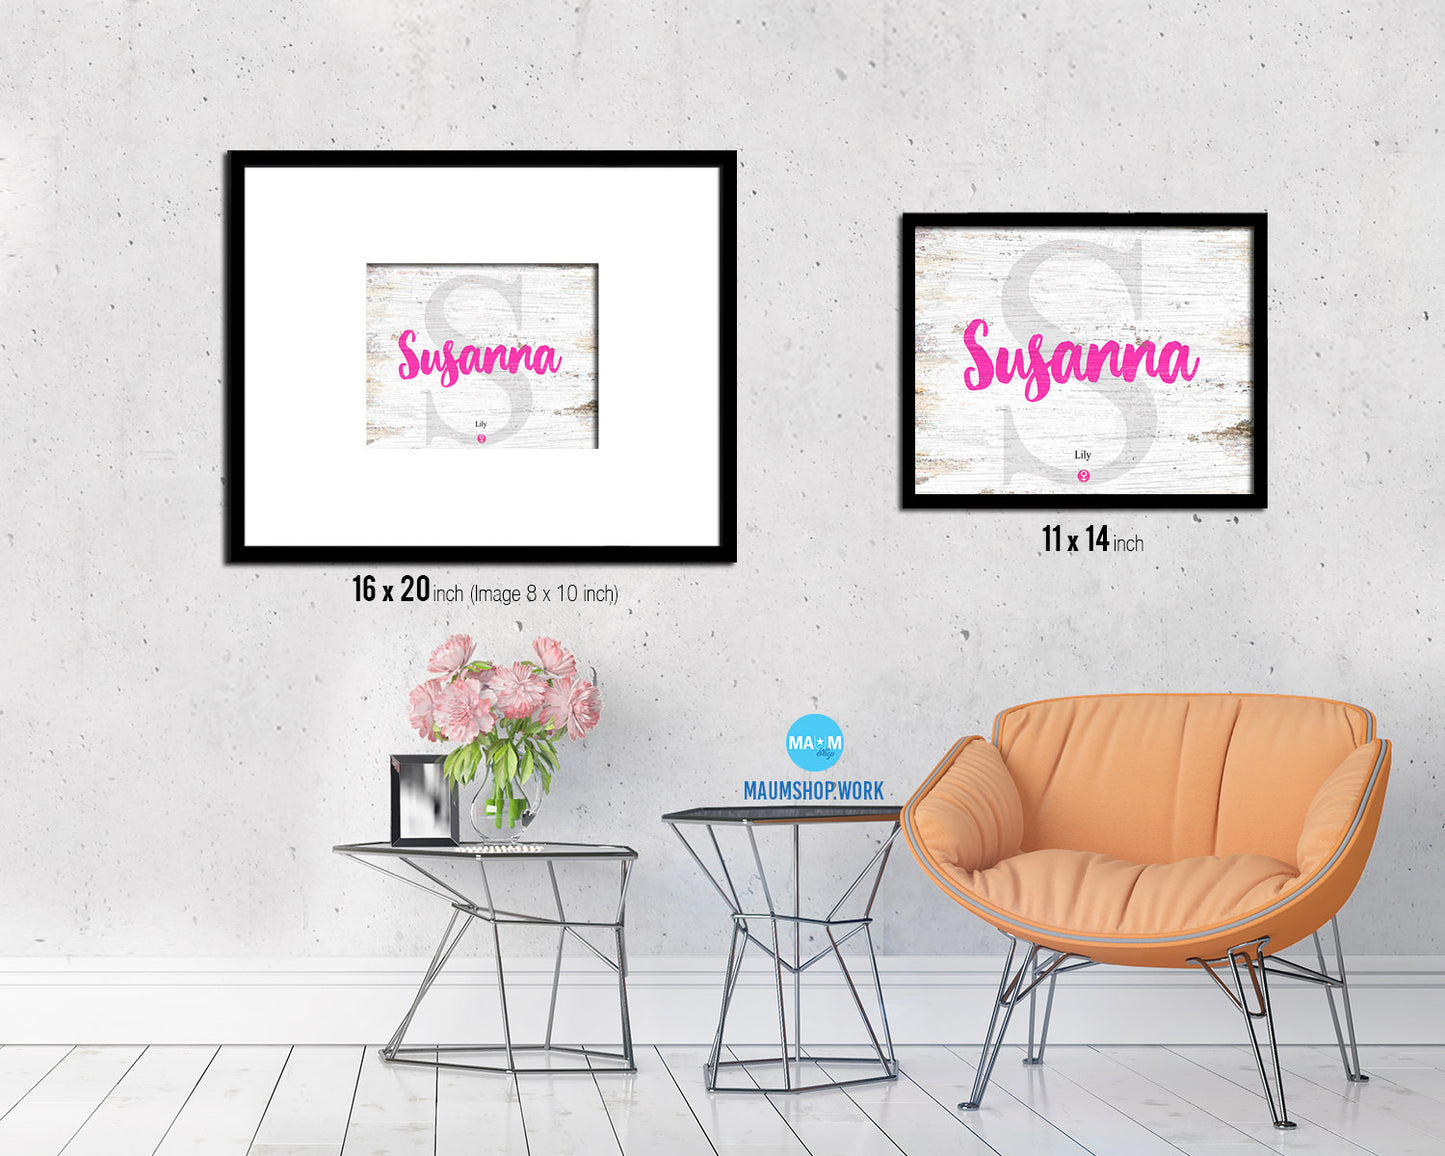 Susanna Personalized Biblical Name Plate Art Framed Print Kids Baby Room Wall Decor Gifts